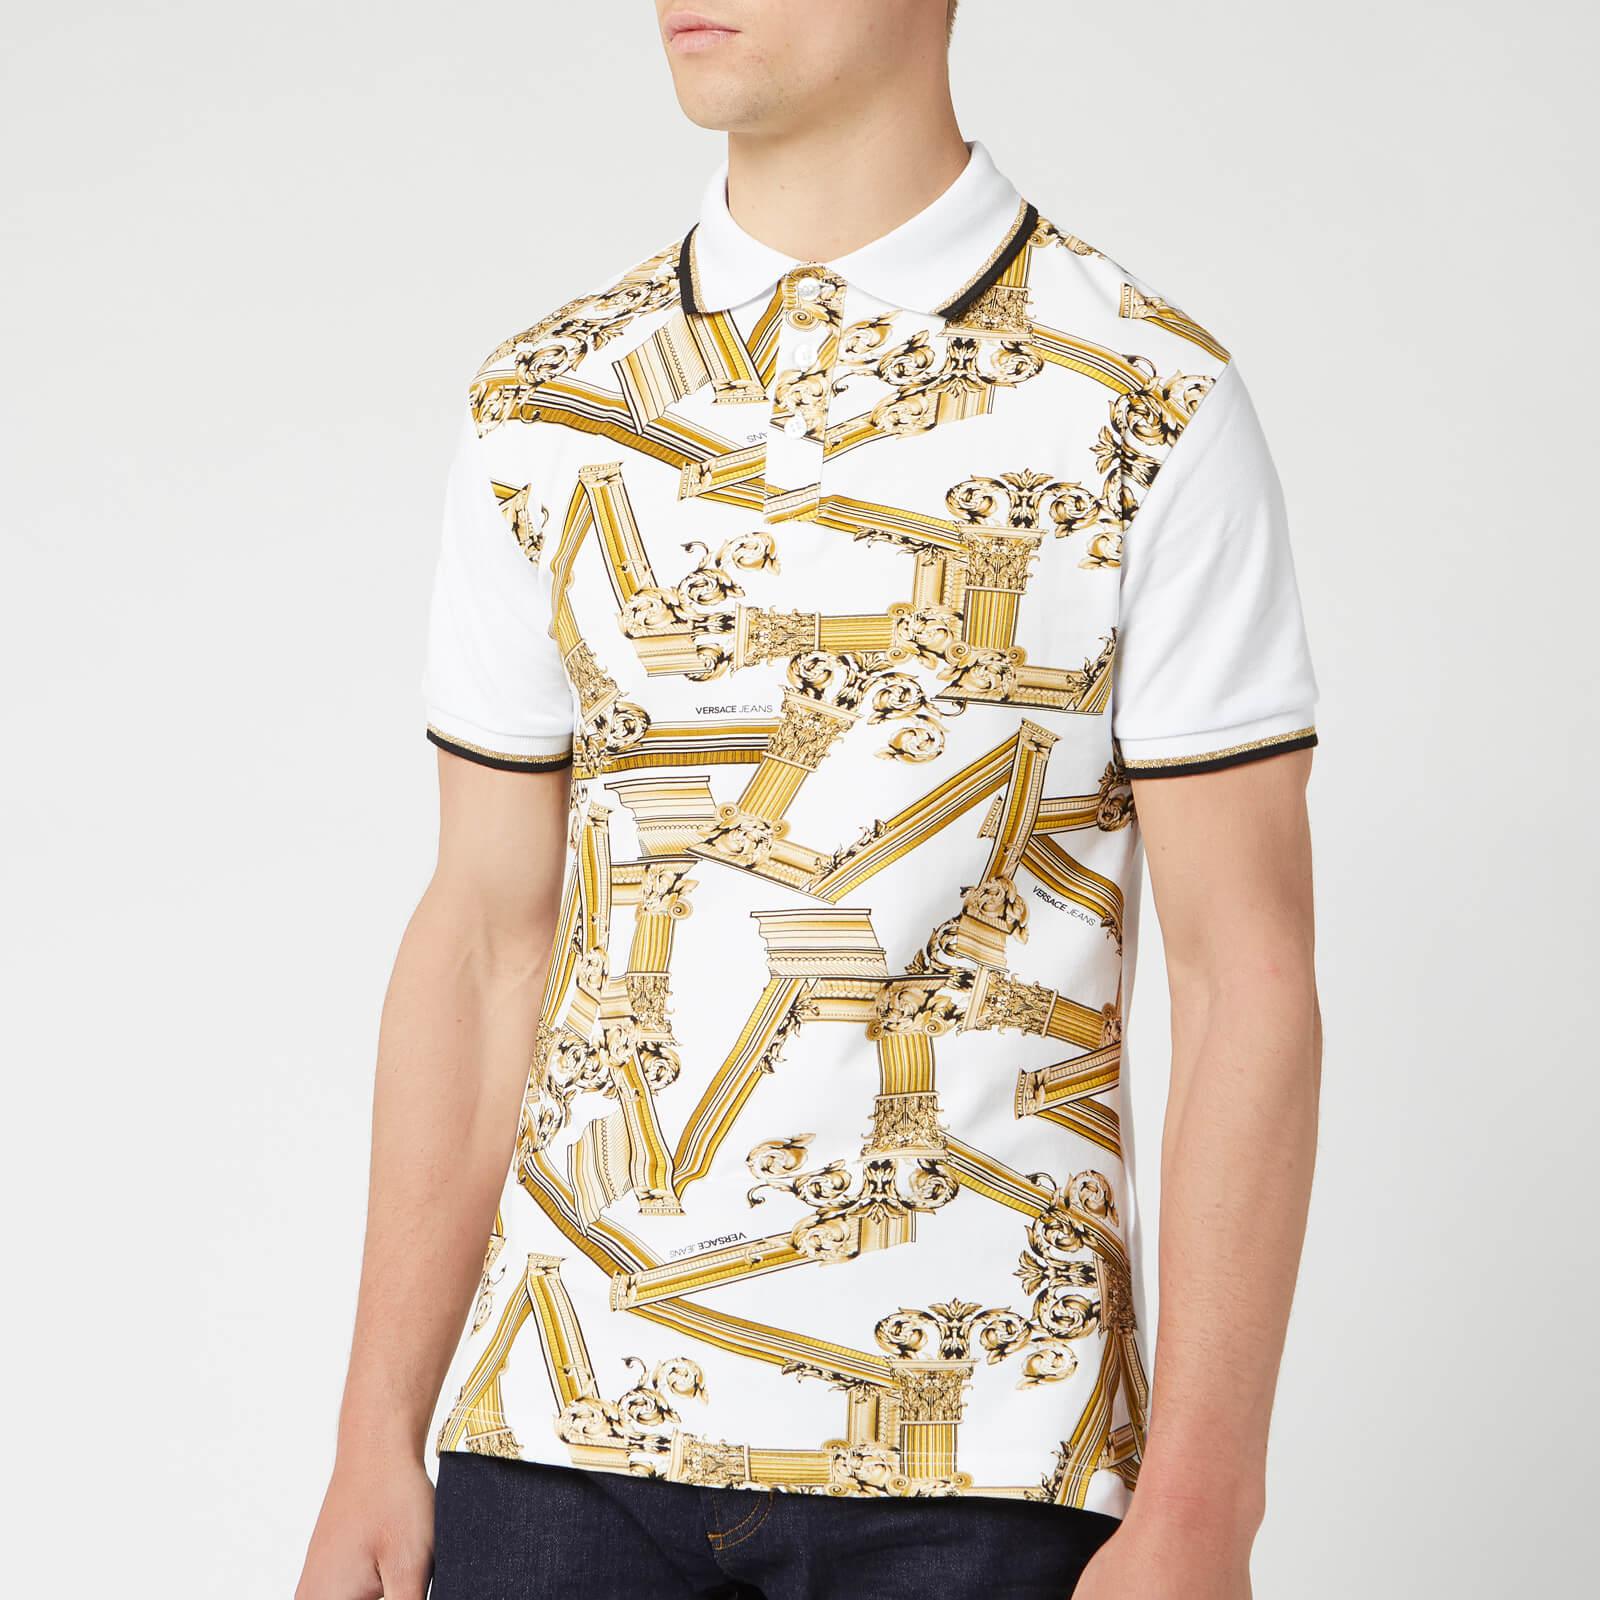 Versace Jeans Patterned Polo Shirt for Men - Lyst